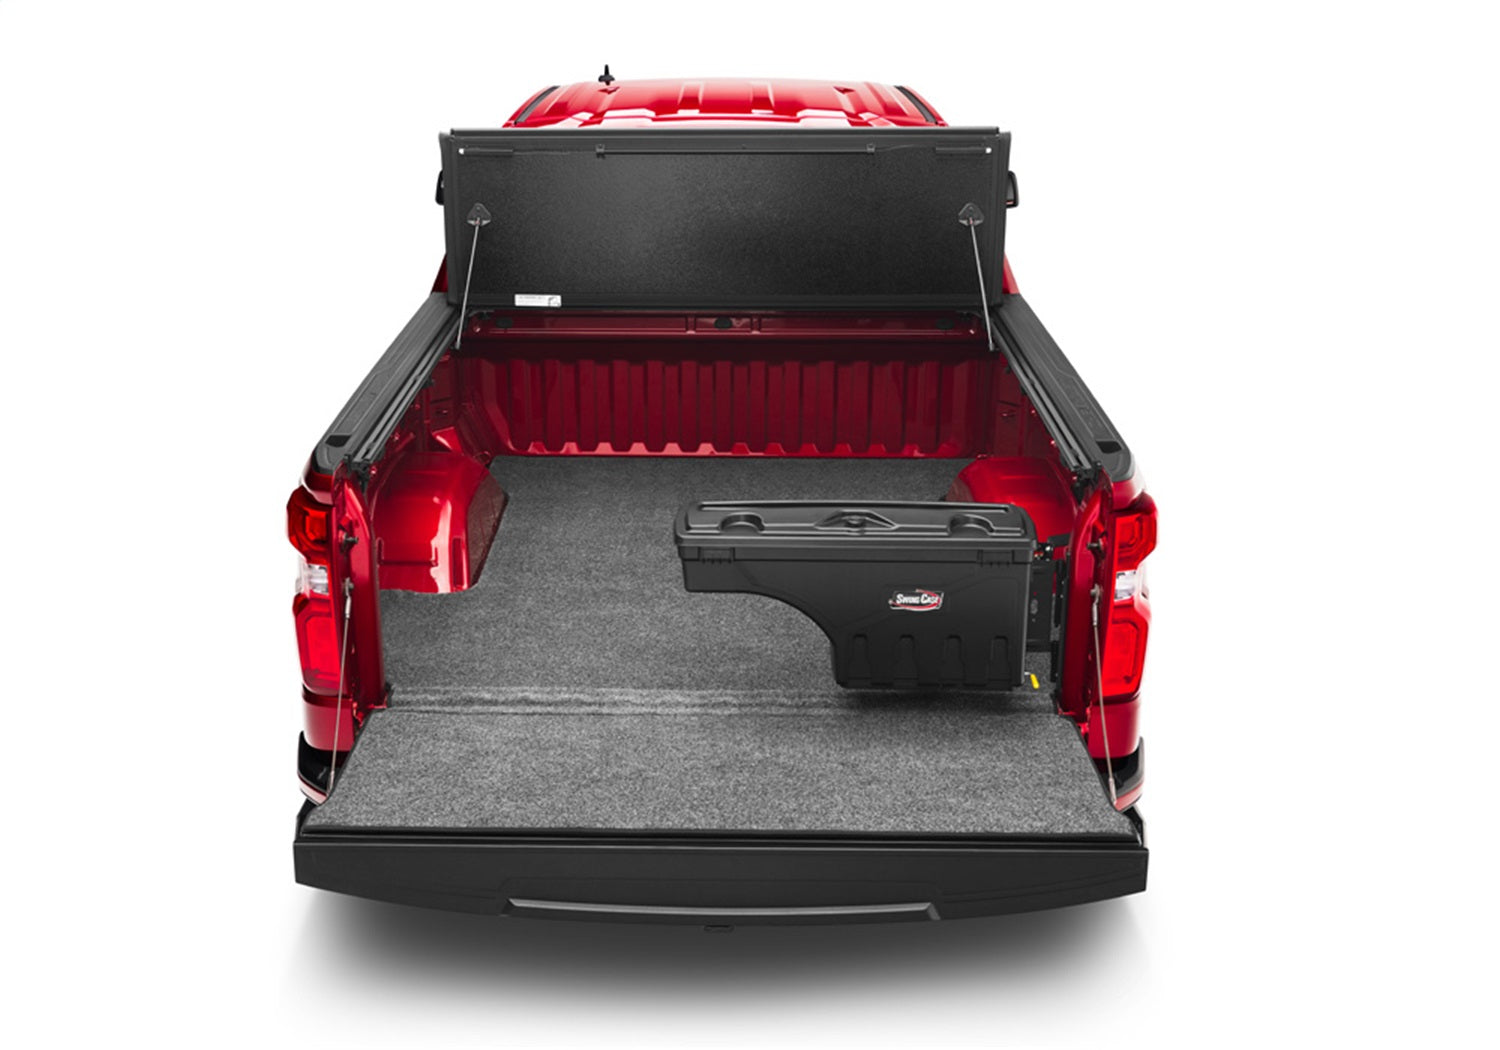 UnderCover SC103P Swing Case Storage Box Fits 15-21 Canyon Colorado